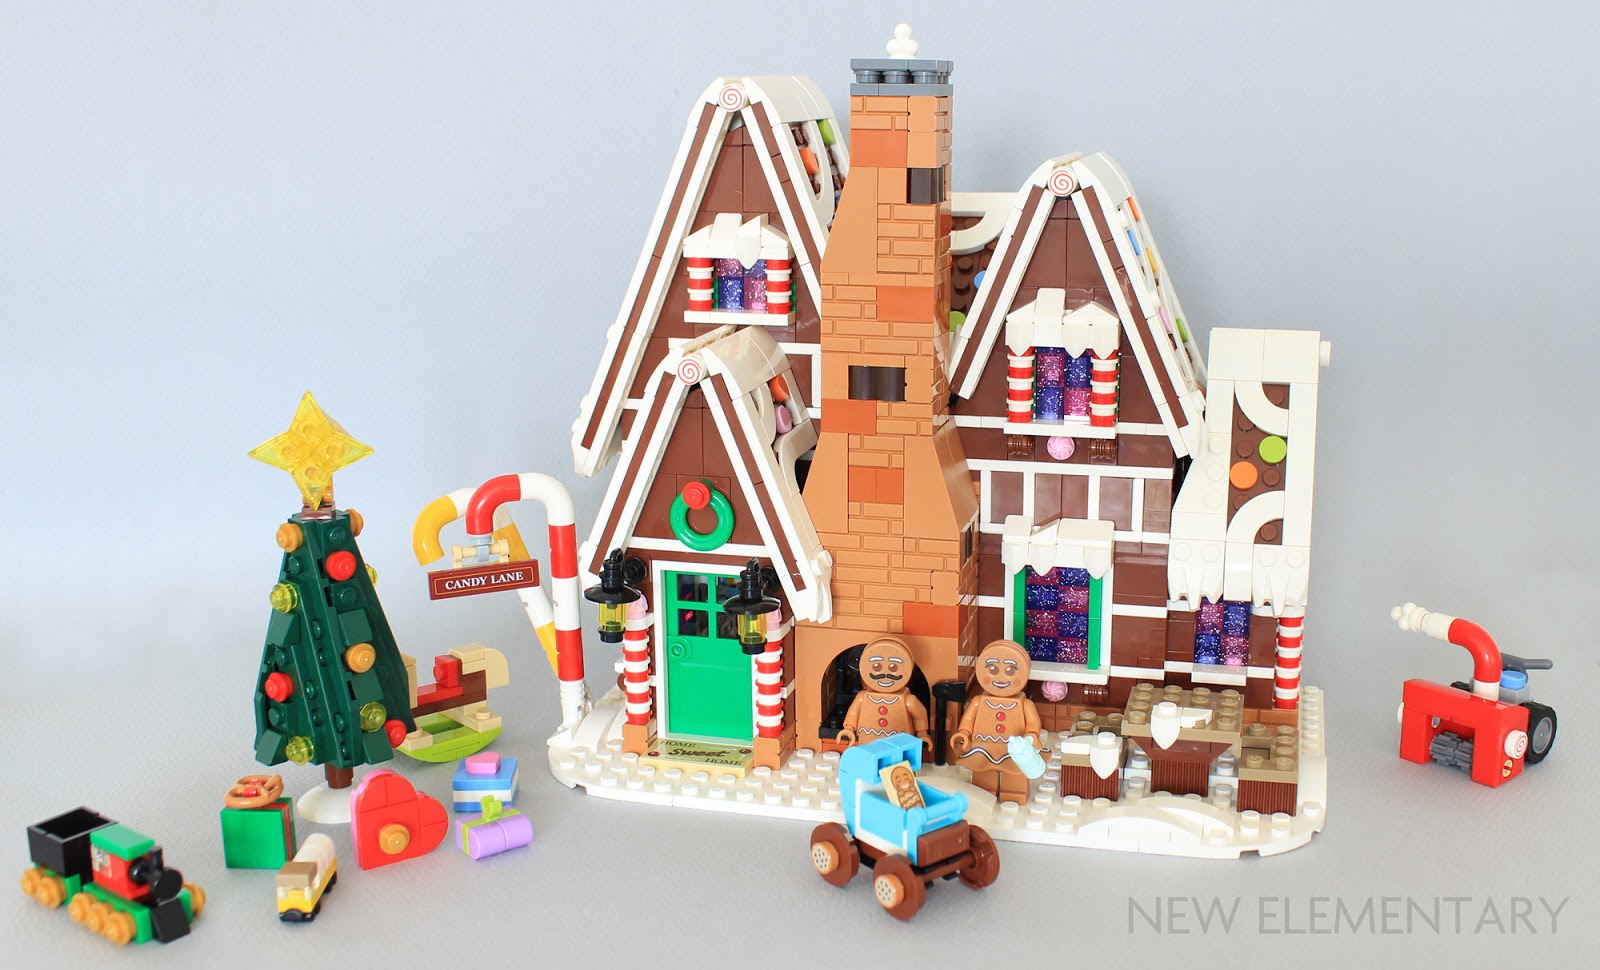 LEGO® Creator Expert review: 10267 Gingerbread House | New Elementary: LEGO® parts, sets and